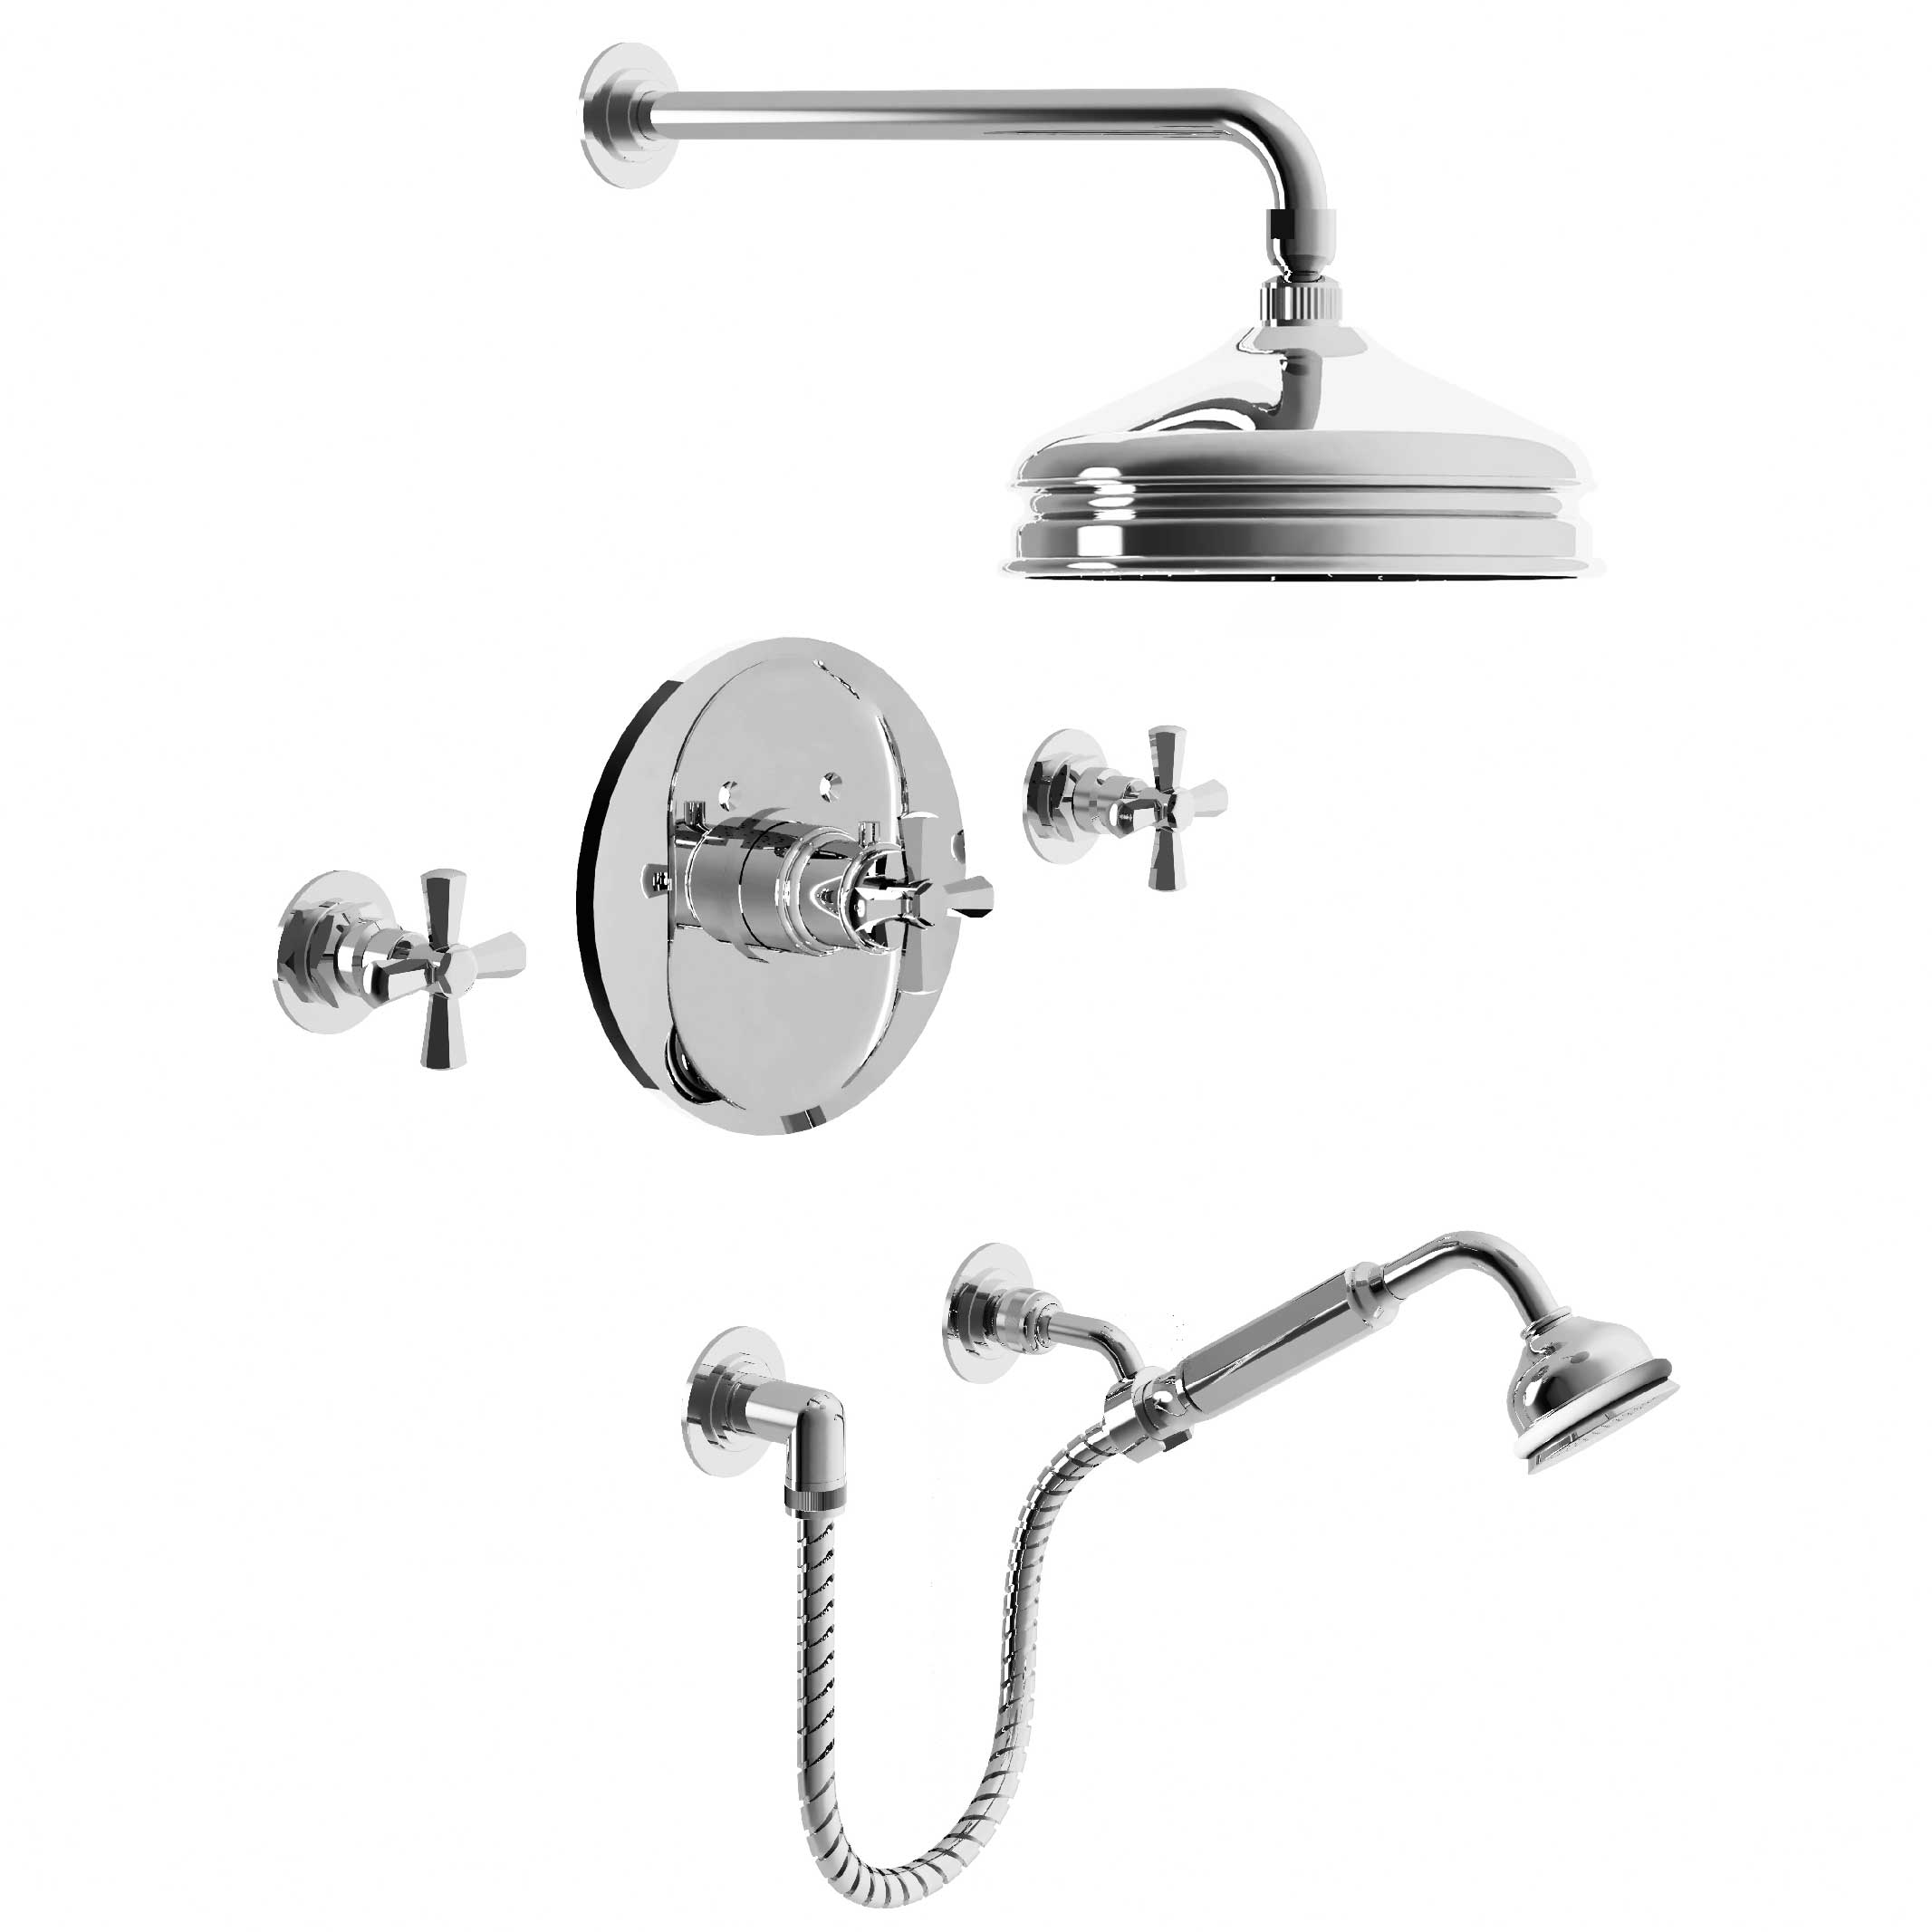 M38-2308T1 Thermostatic shower mixer package